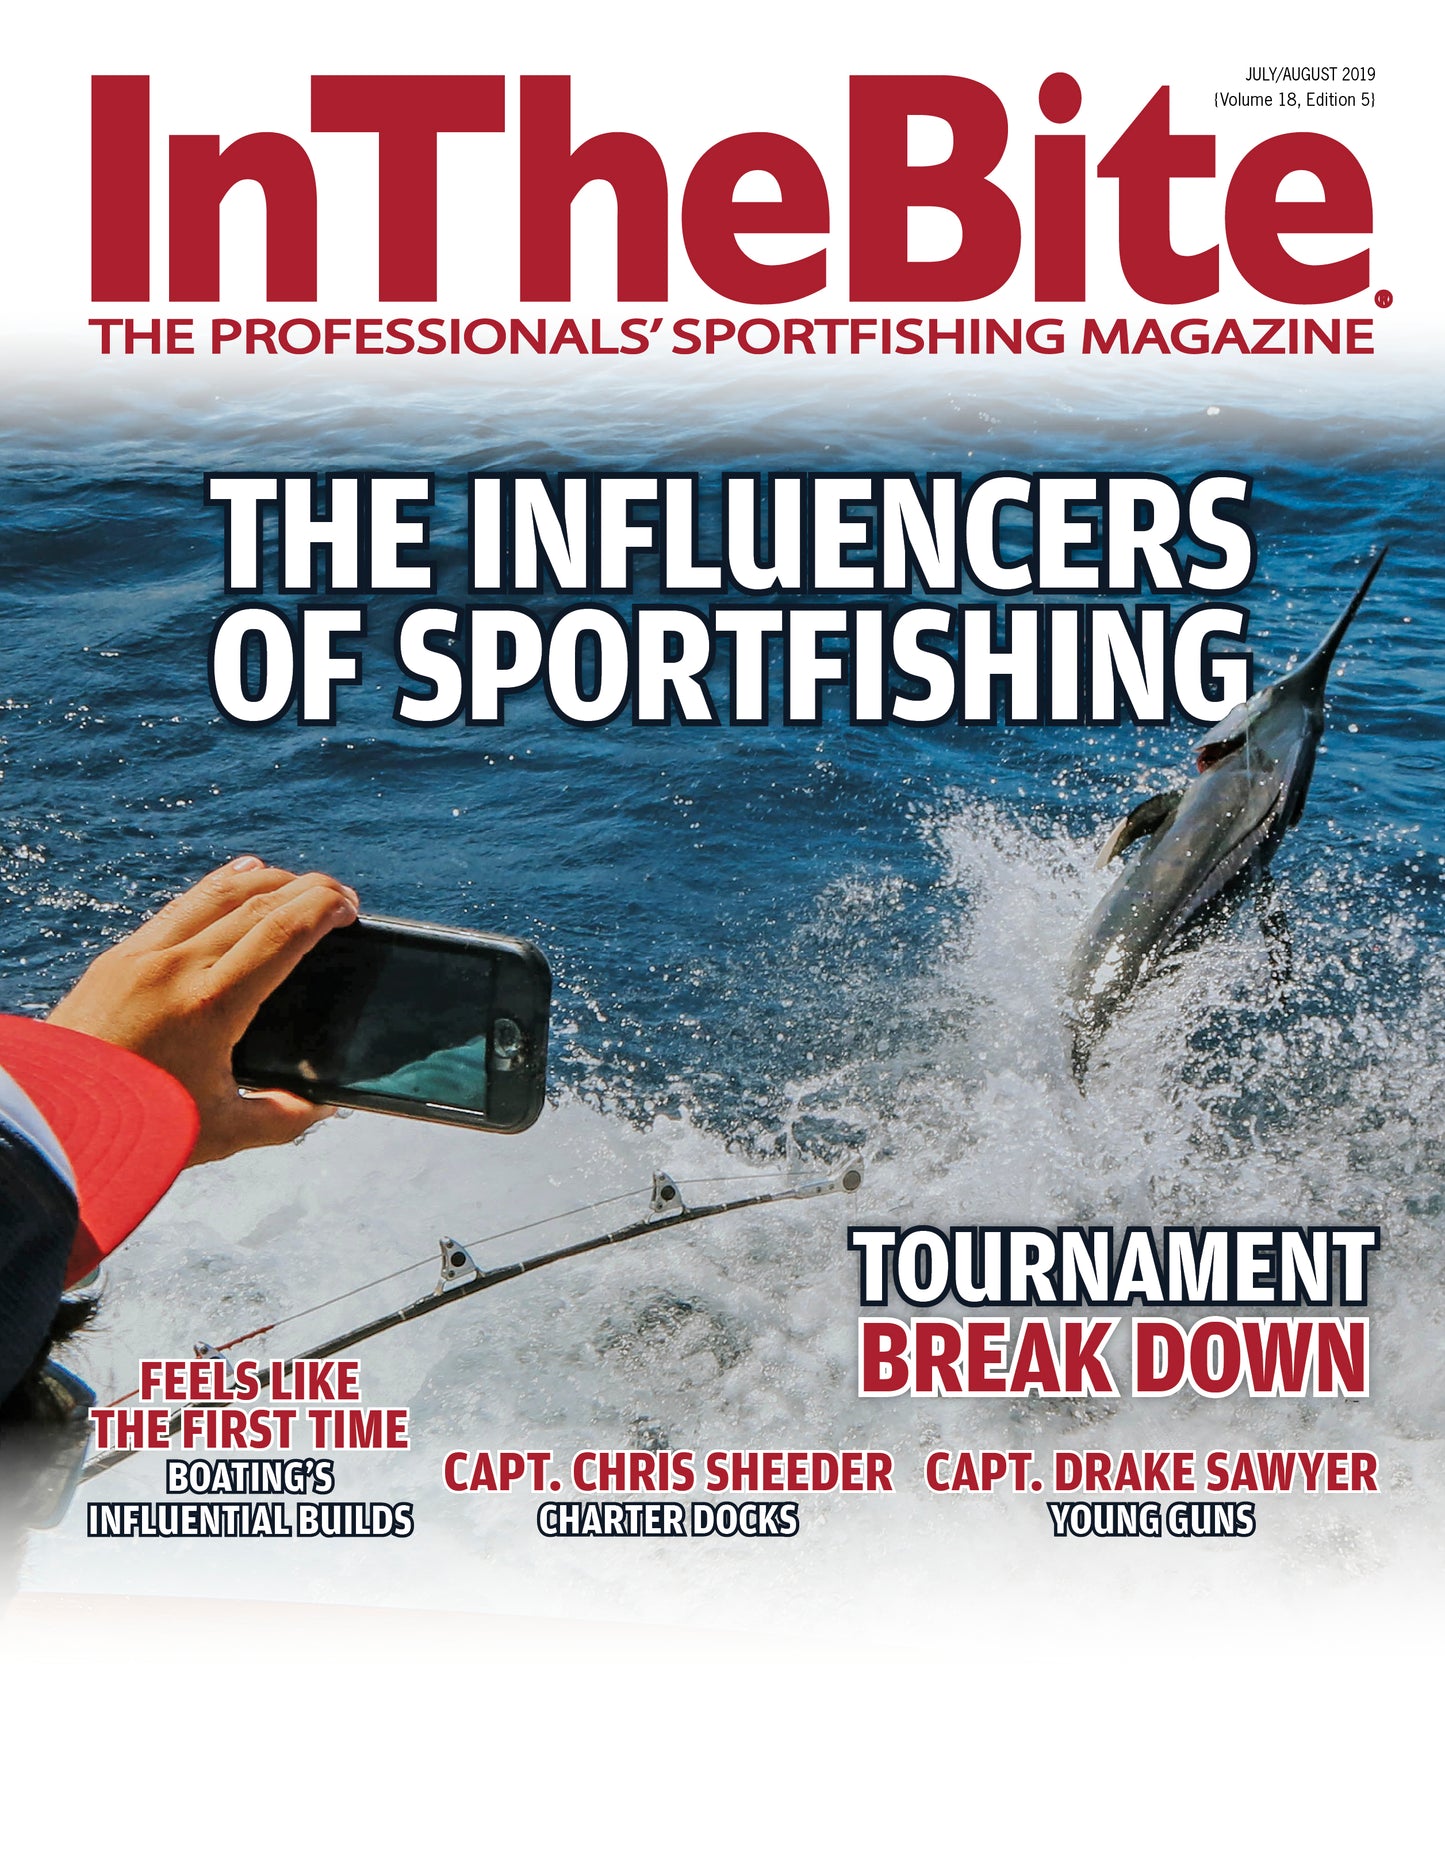 InTheBite Volume 18 Edition 05 July/August 2019